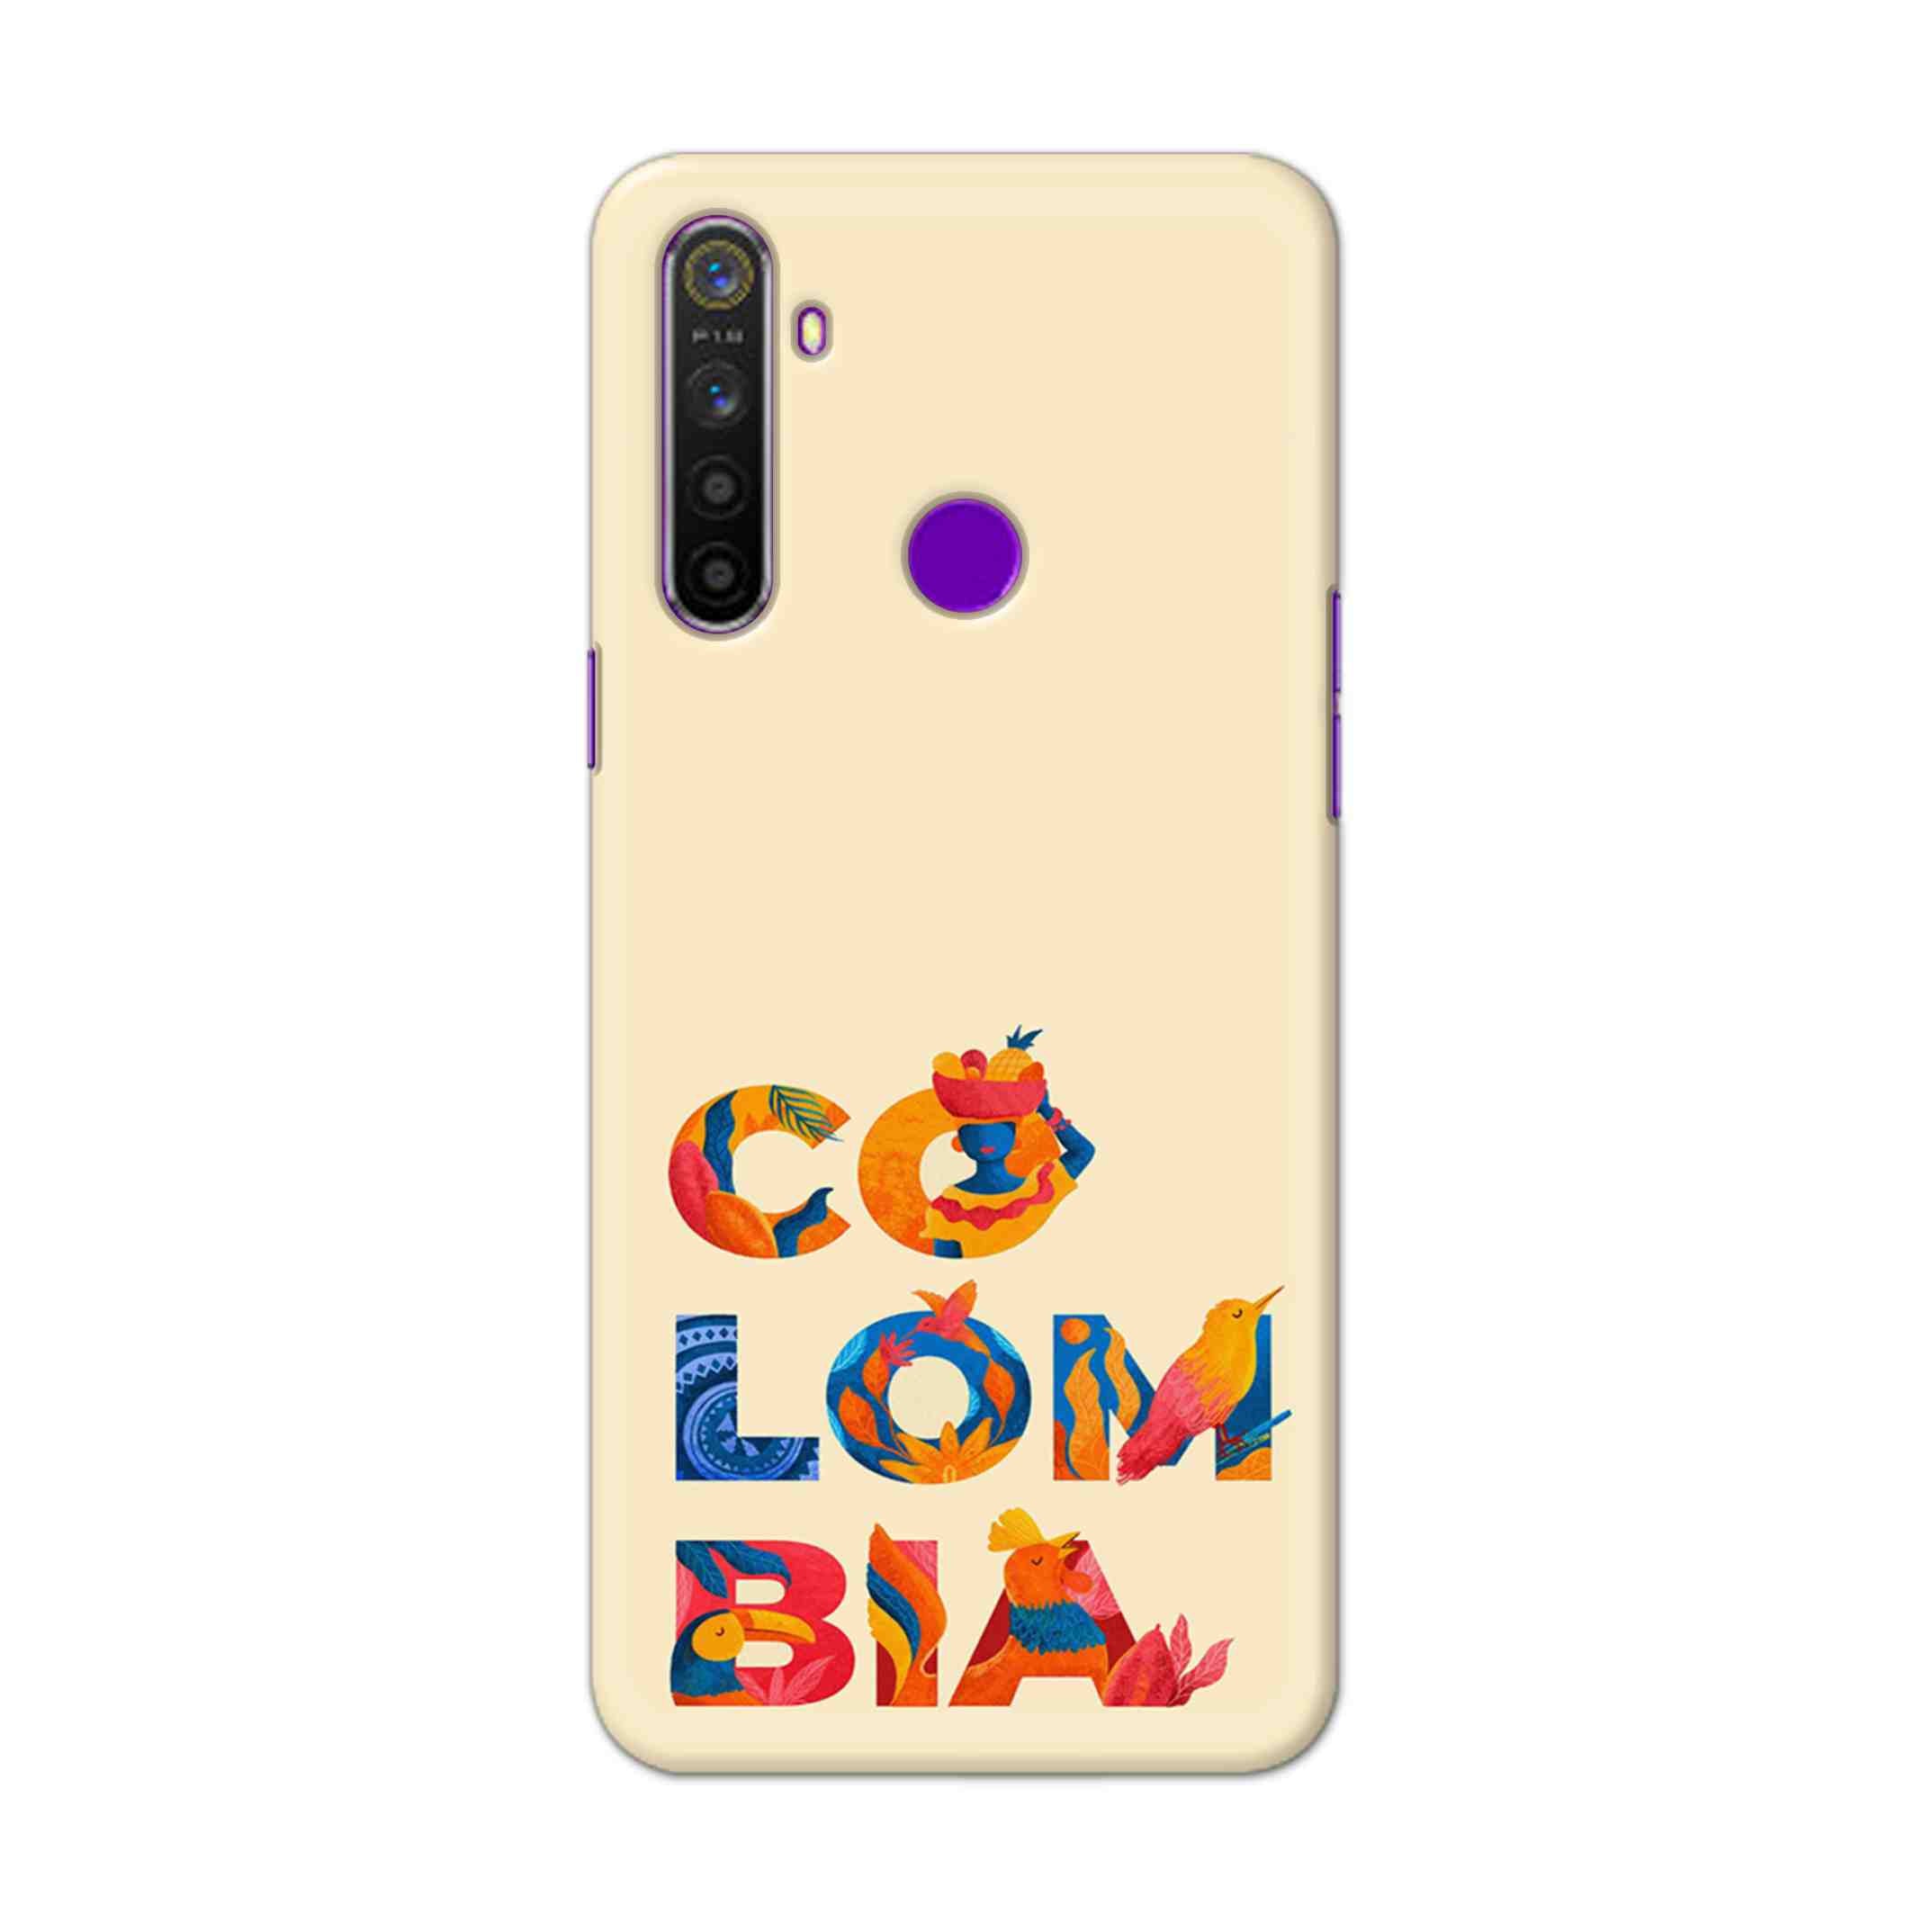 Buy Colombia Hard Back Mobile Phone Case Cover For Realme 5 Pro Online